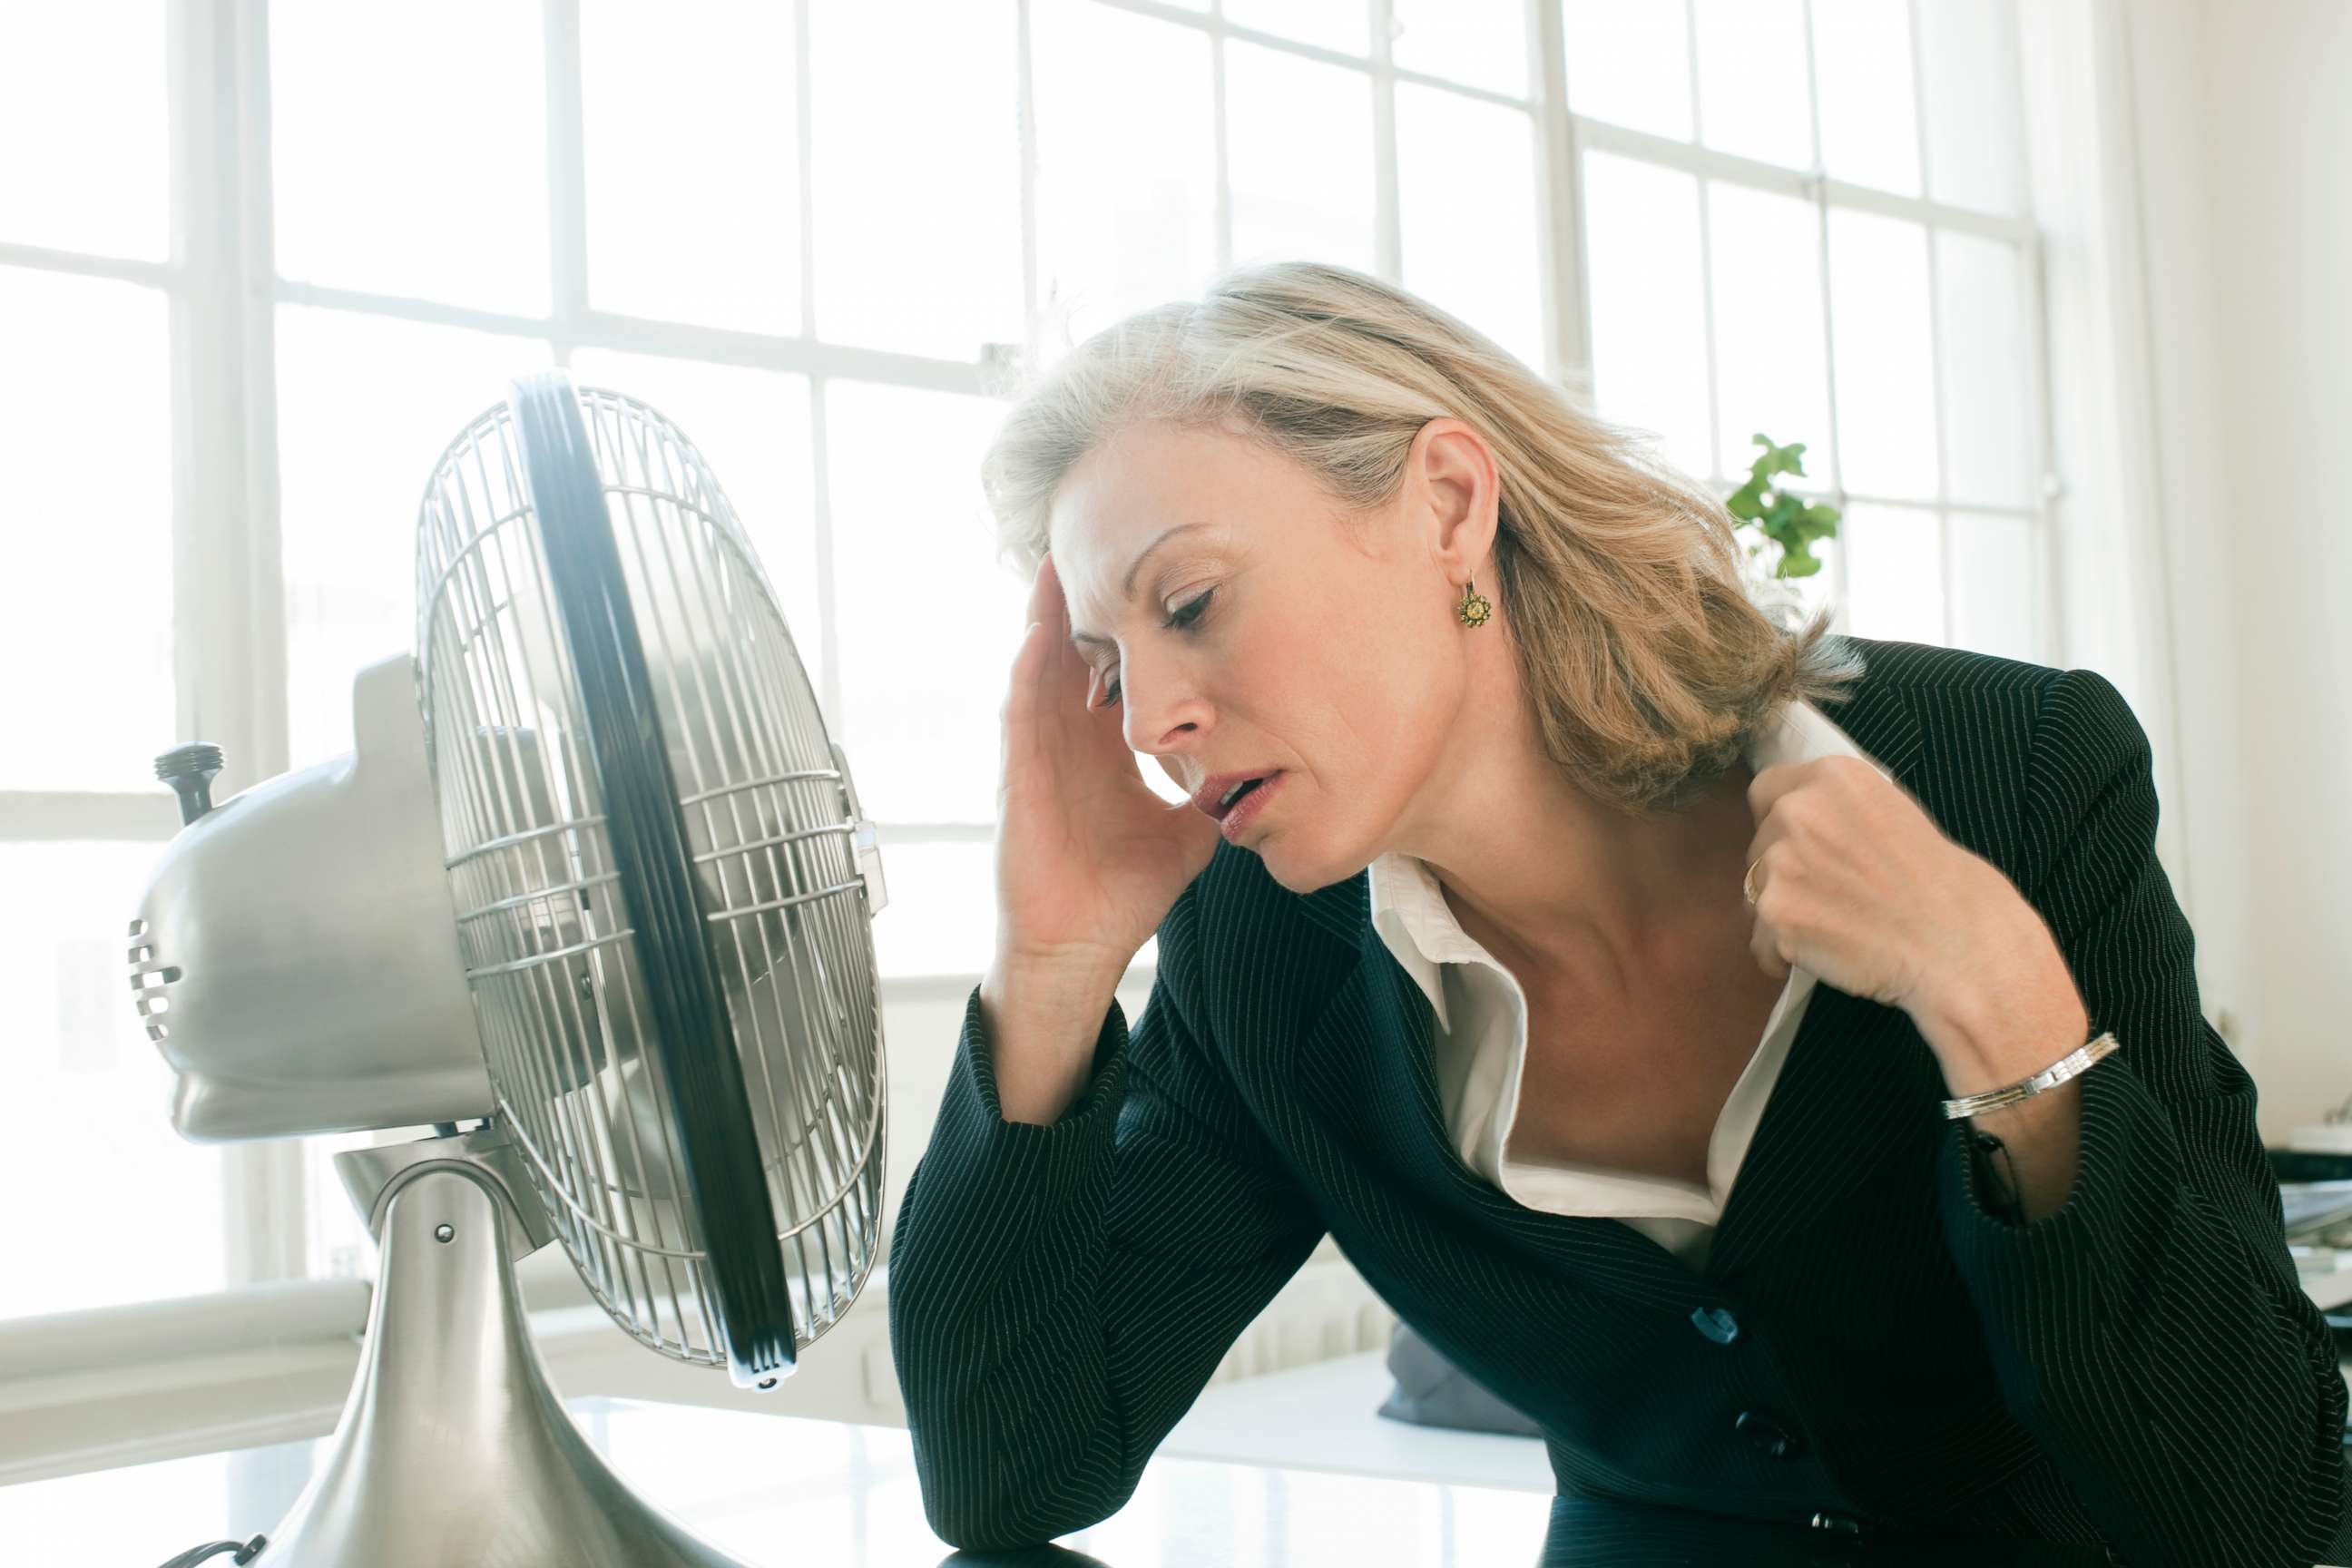 PHOTO: A woman is pictured having a hot flash in this undated stock photo.